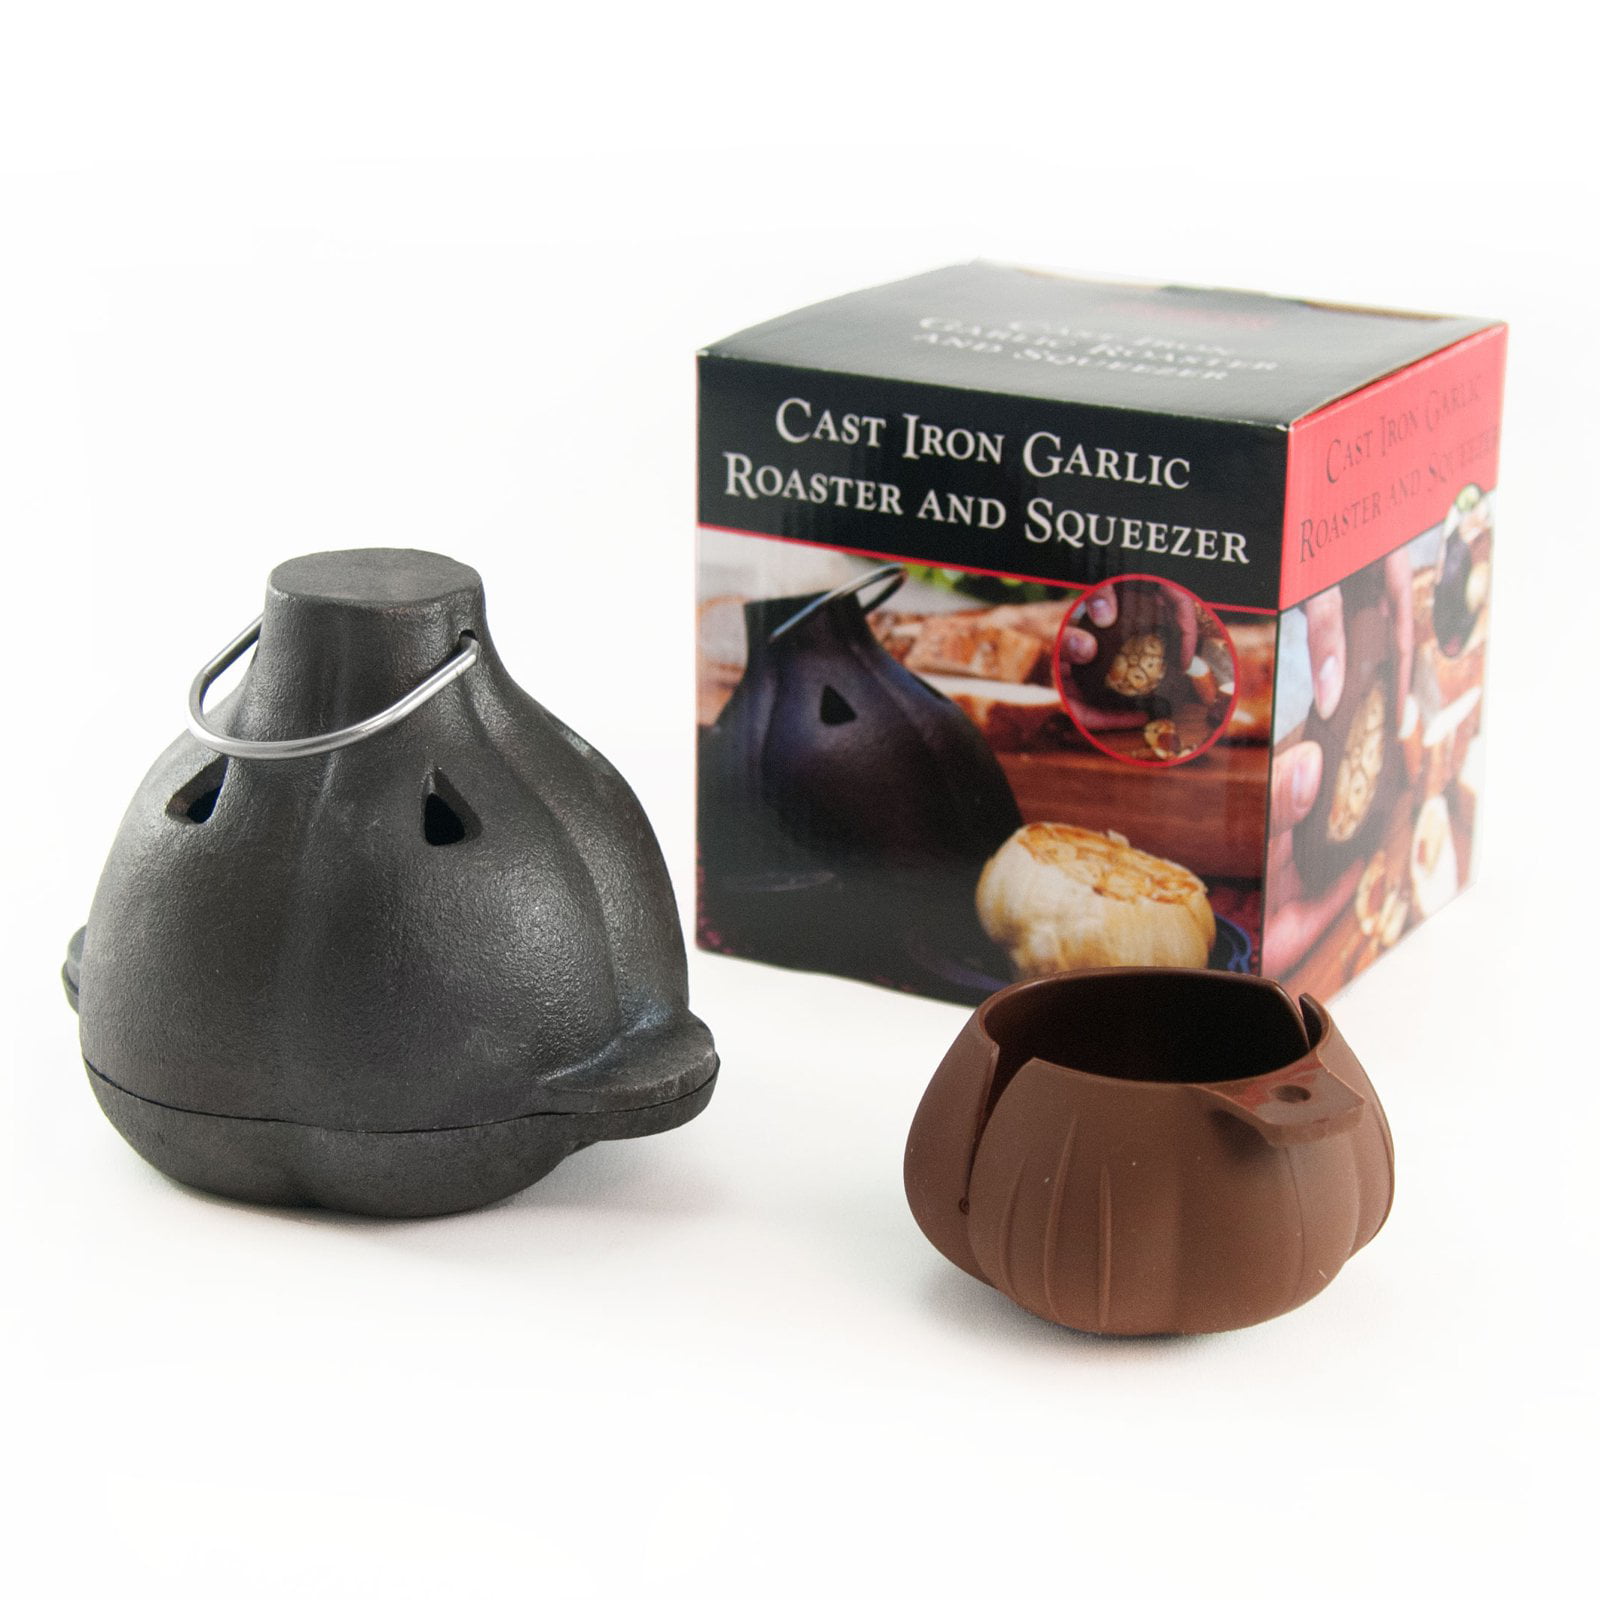 Charcoal Companion Cast Iron Garlic Roaster And Squeezer Set For Kitchen Or Grill Walmart Com